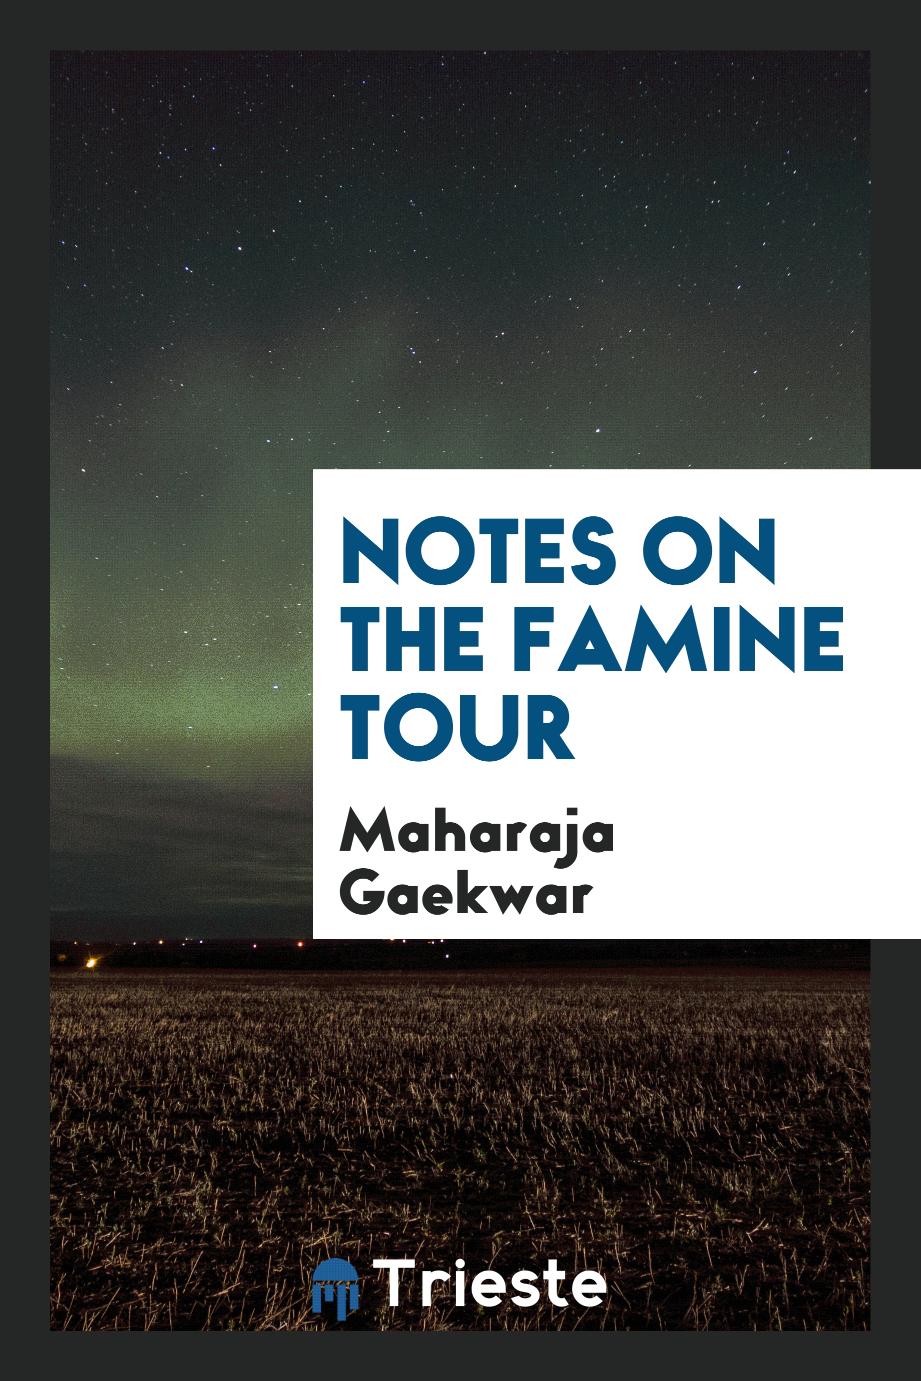 Notes on the Famine Tour